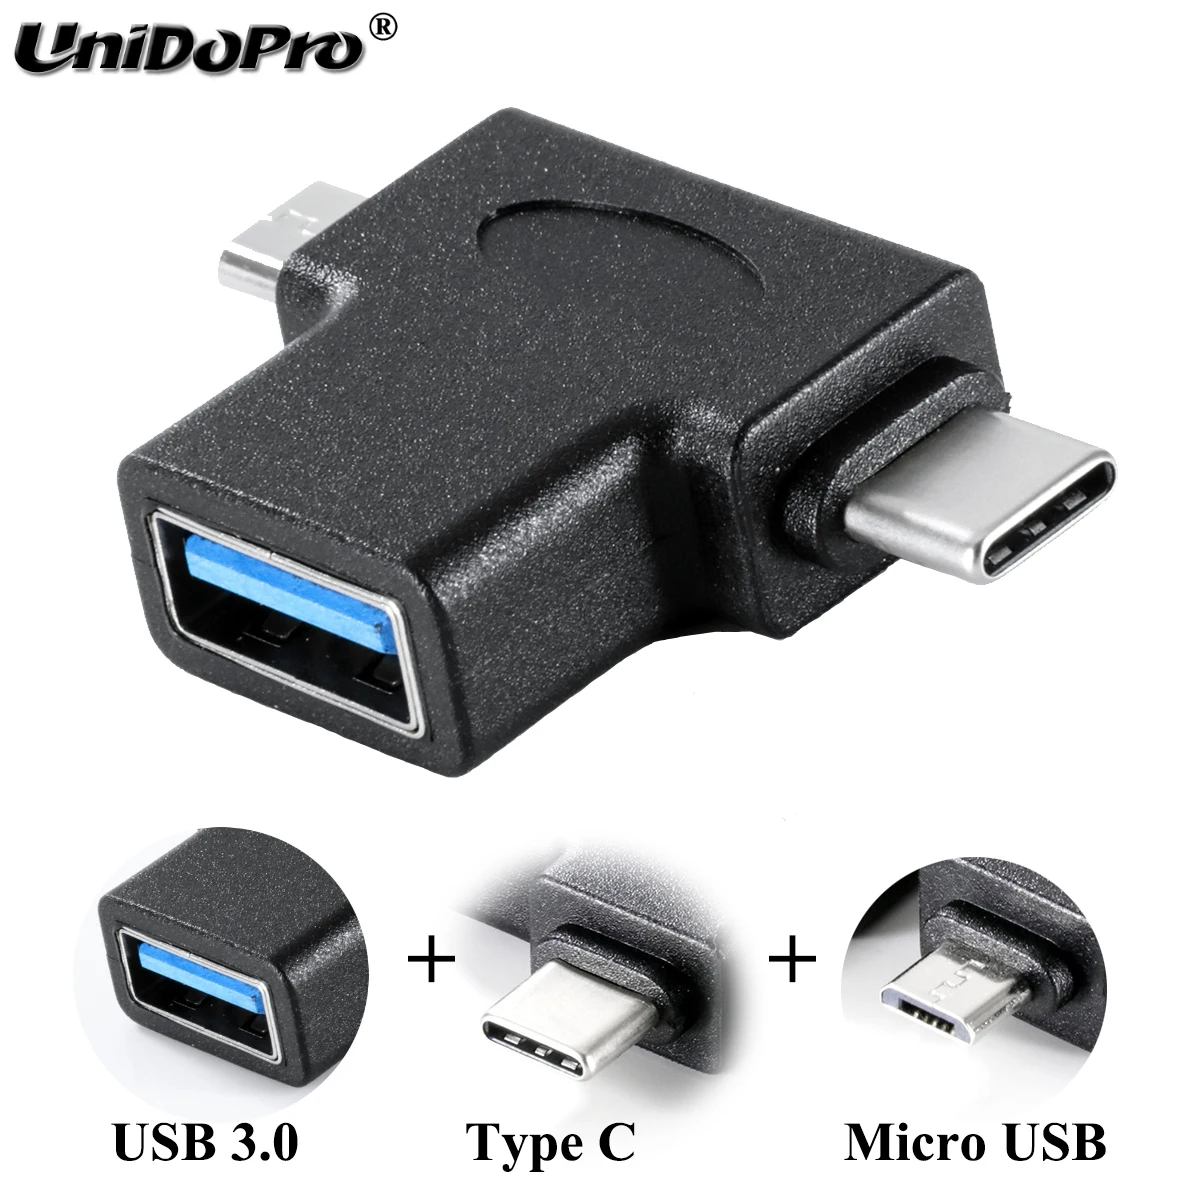 PRO OTG Power Cable Works for Motorola Moto E3 with Power Connect to Any Compatible USB Accessory with MicroUSB 